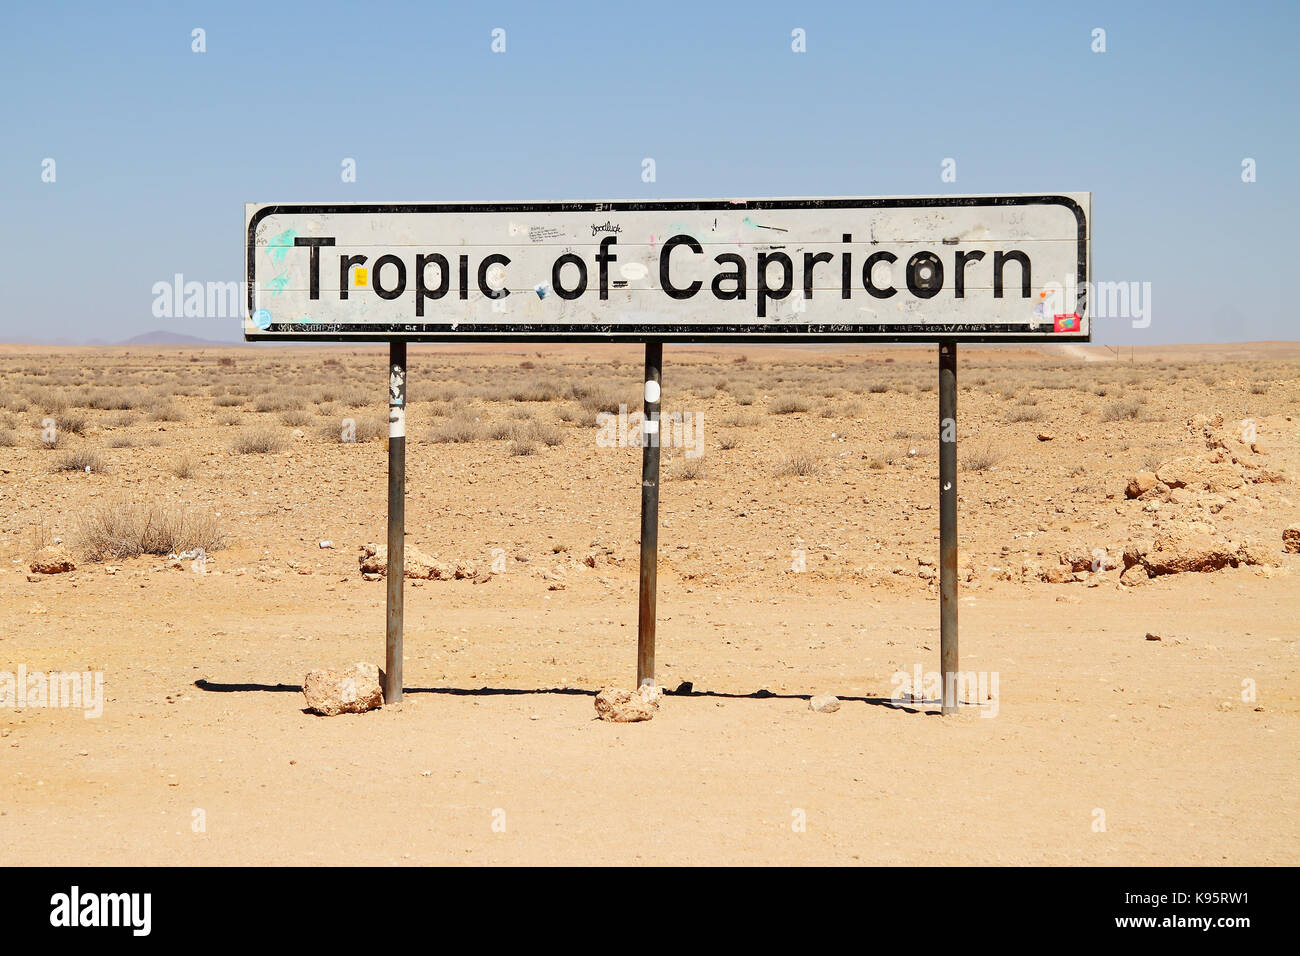 Tropic of Capricorn sign in Namibia, Africa. Stock Photo